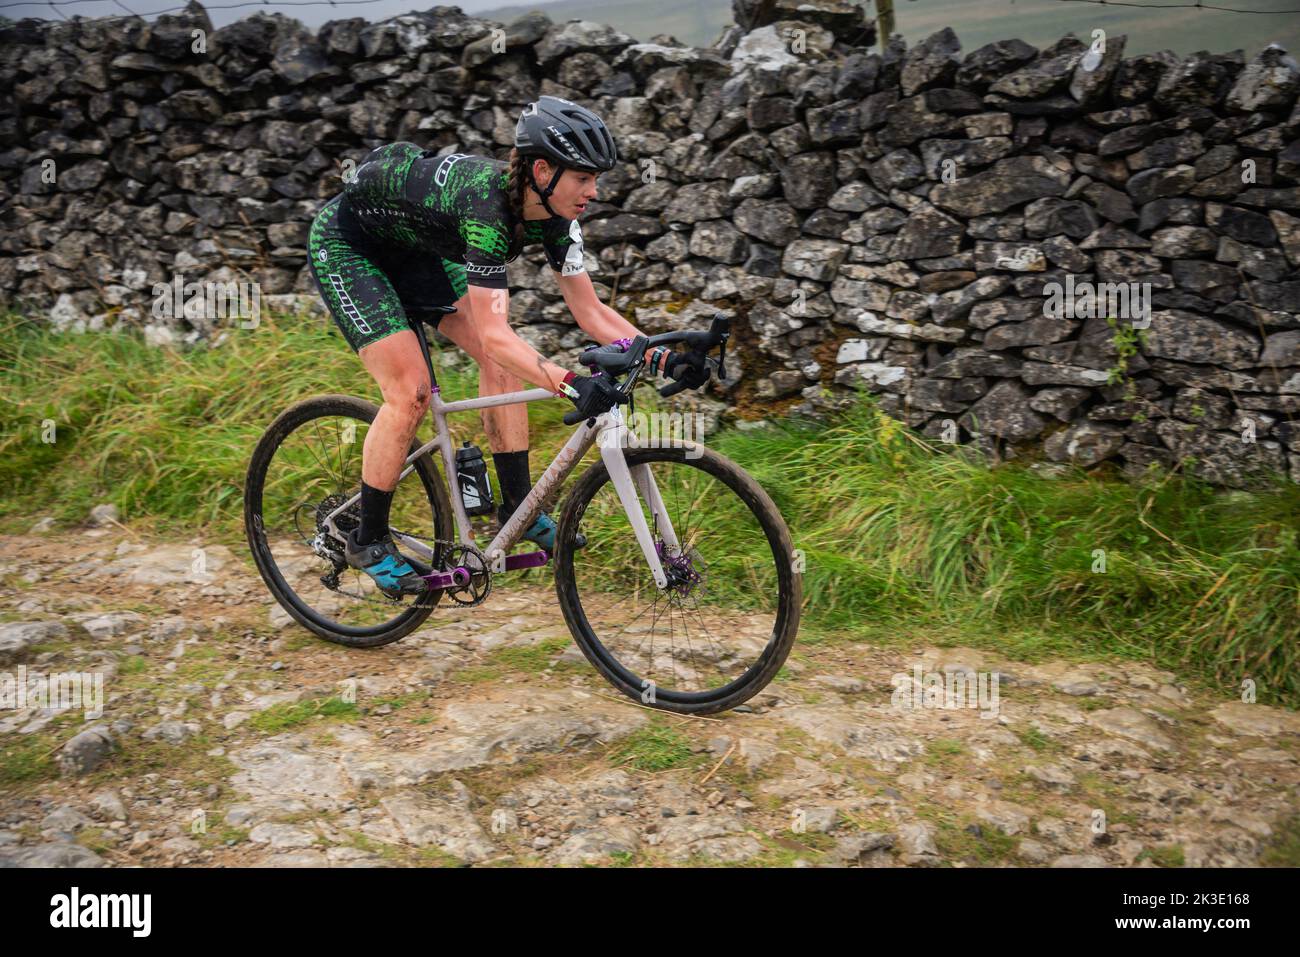 Victoria Peel,Hope Factory Racing team, First Lady in the 3 Peaks cyclocross, Horton in Ribblesdale, Yorkshire Dales, UK. Stock Photo